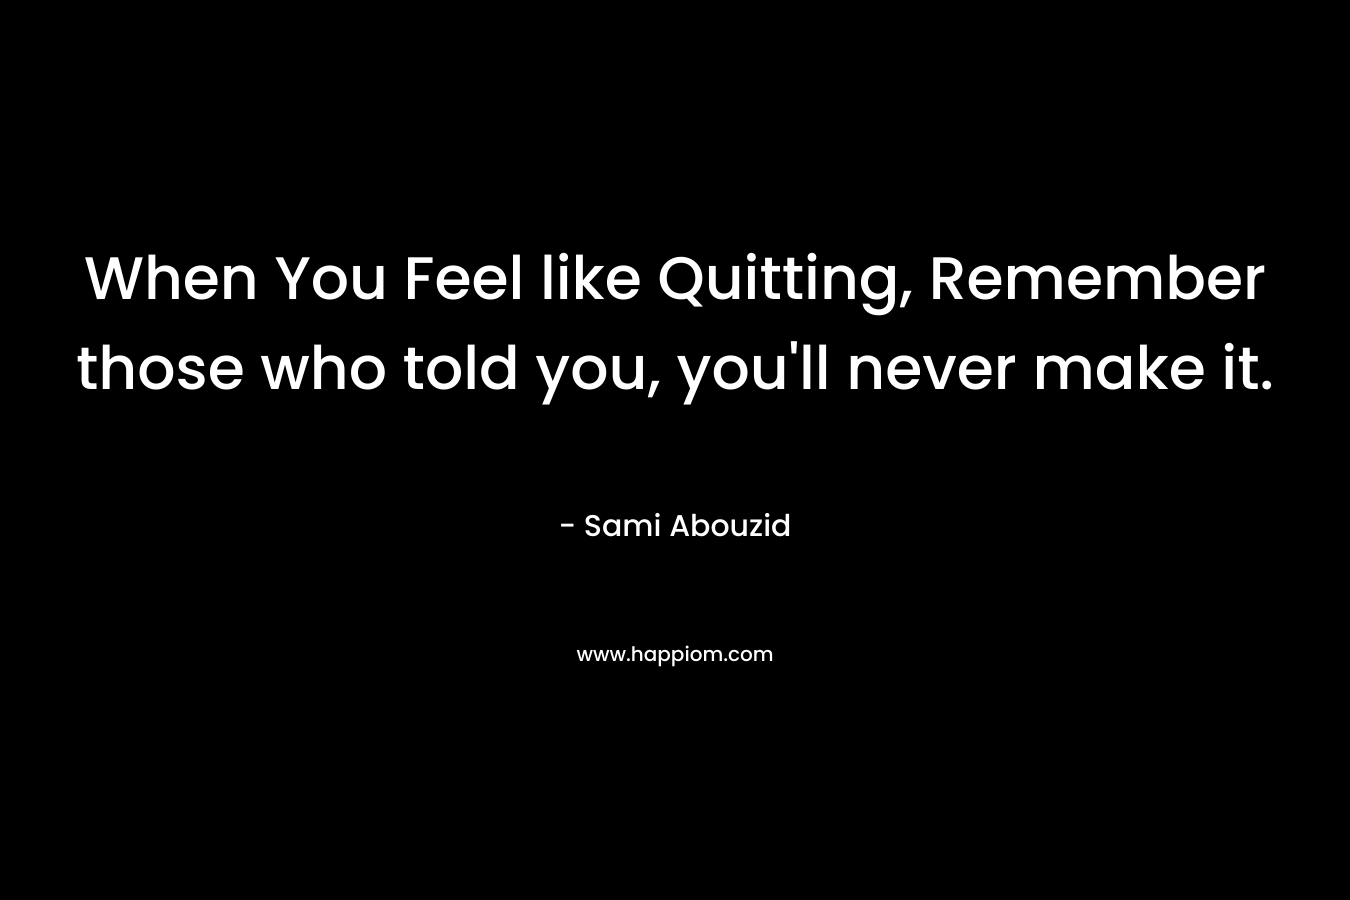 When You Feel like Quitting, Remember those who told you, you'll never make it.